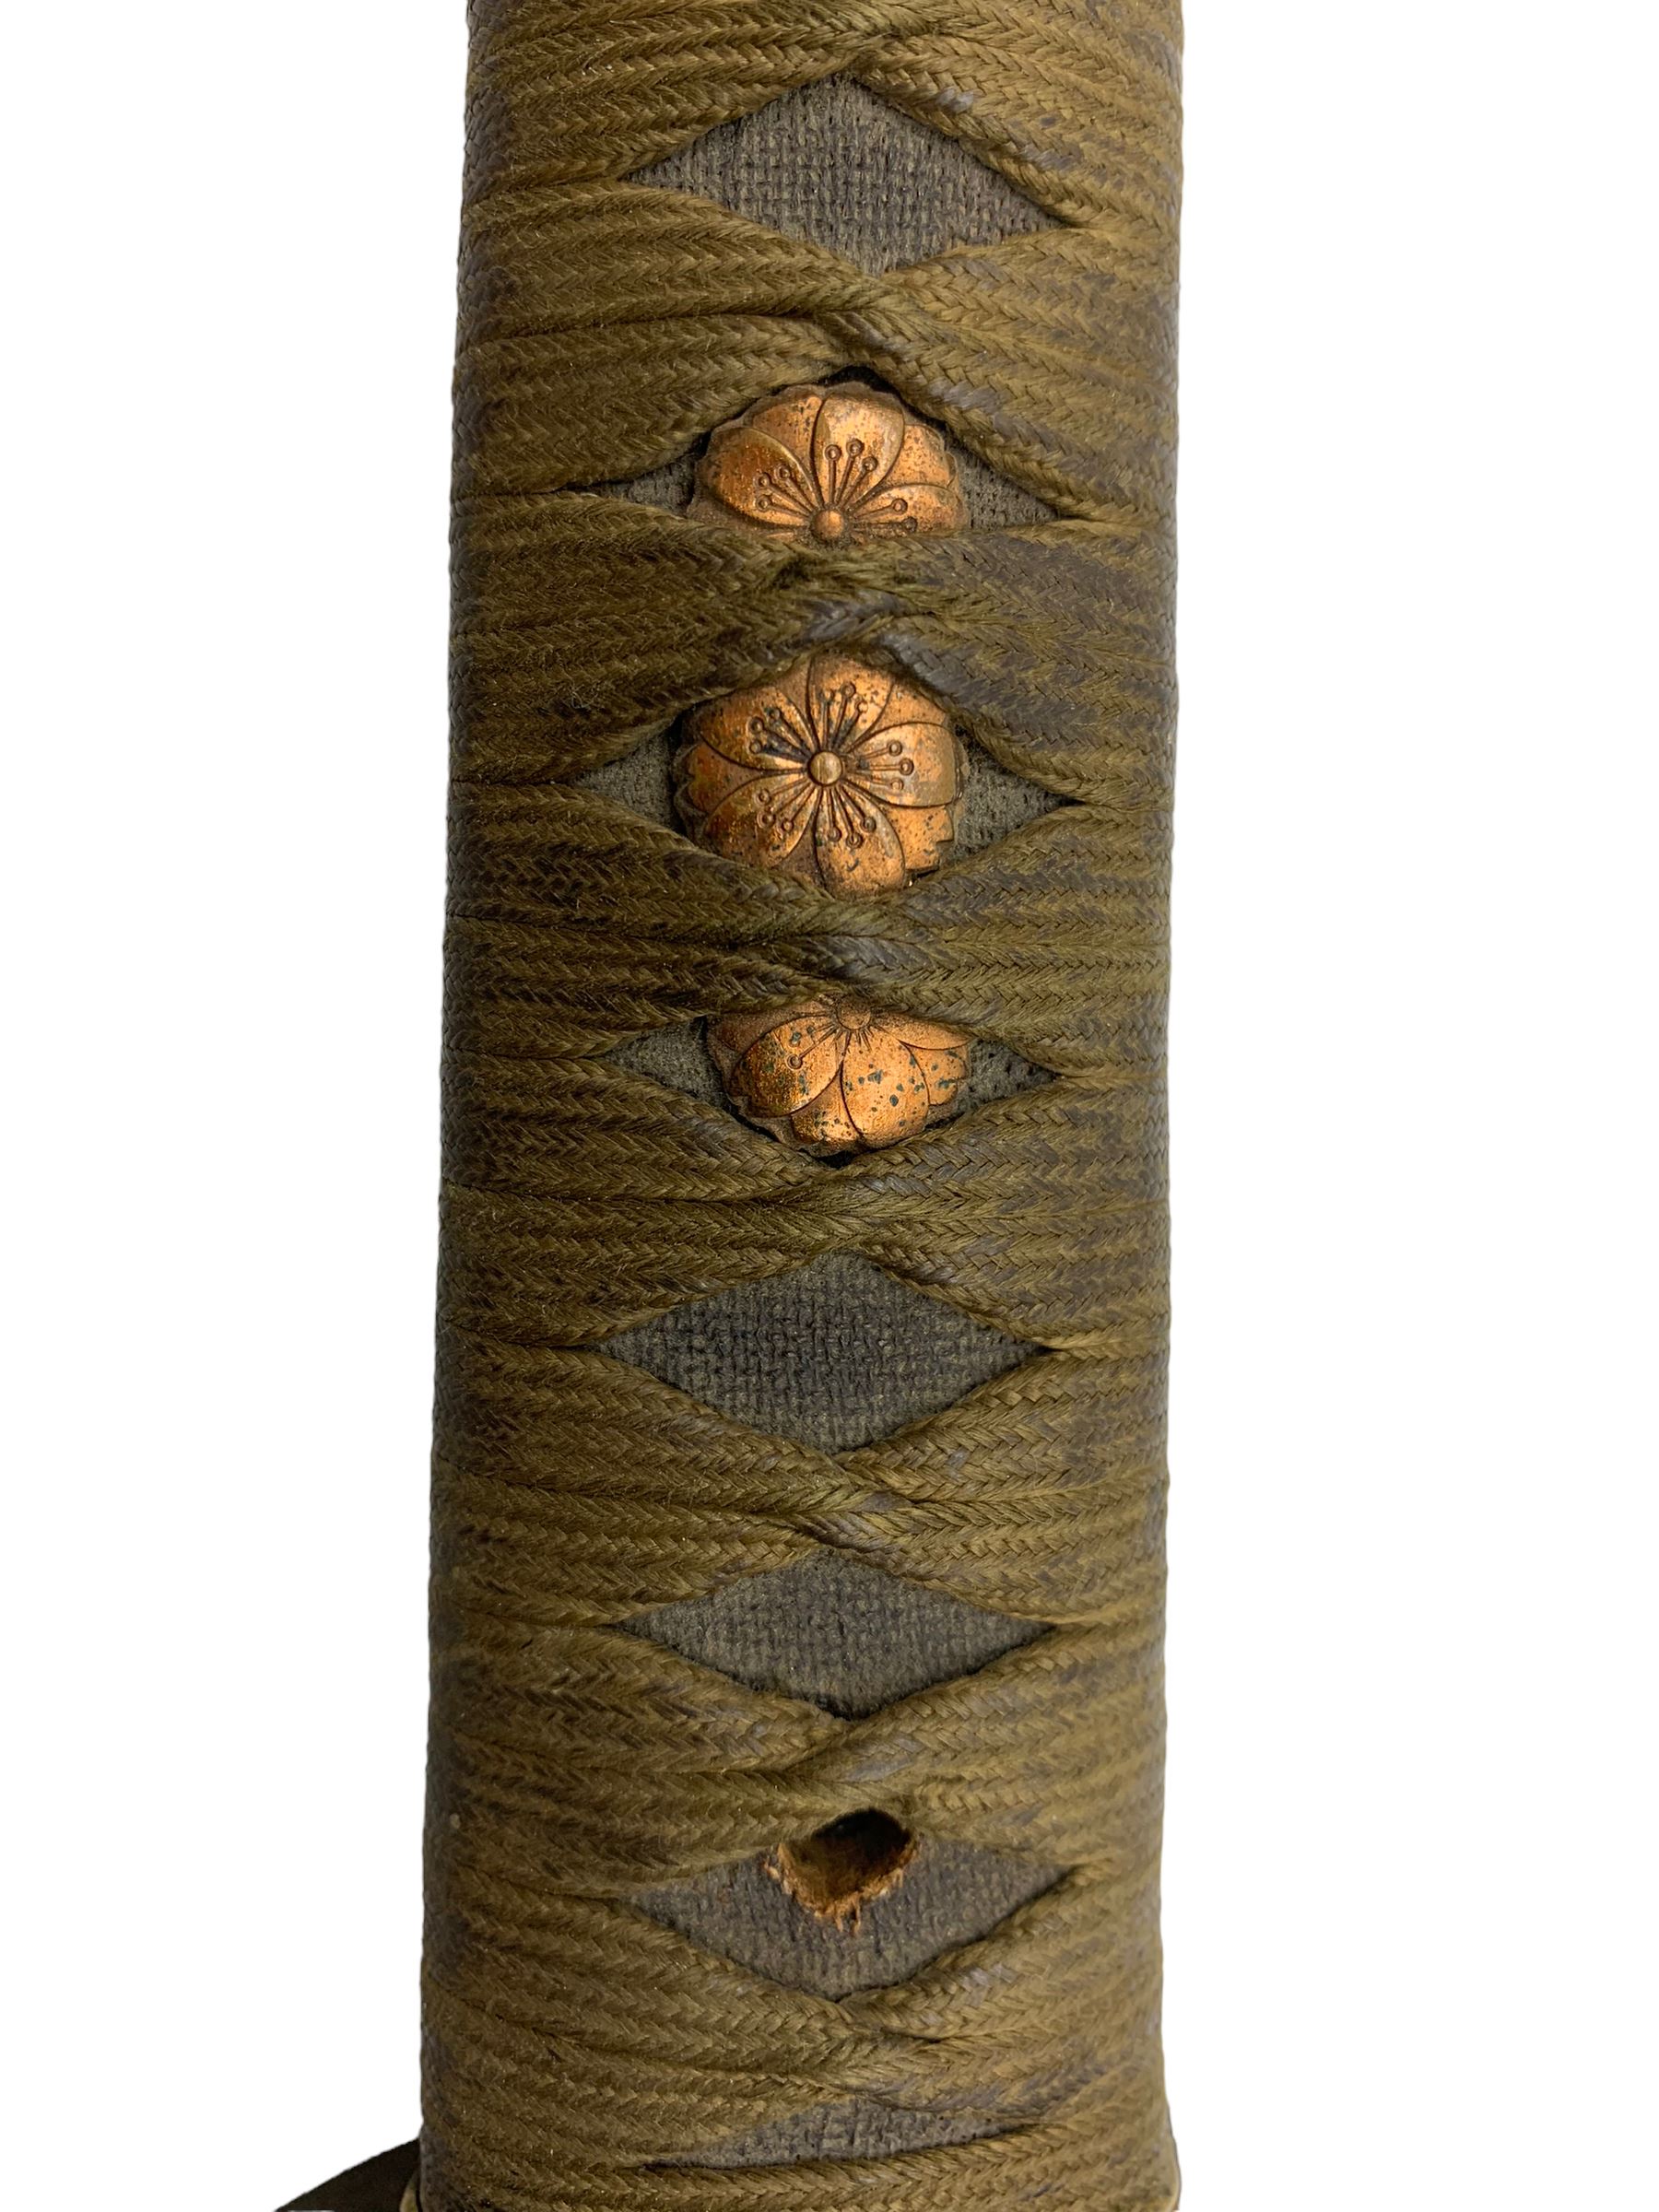 World War II Japanese Katana with cord wound tsuka and military mounts in lacquered scabbard - Image 5 of 10